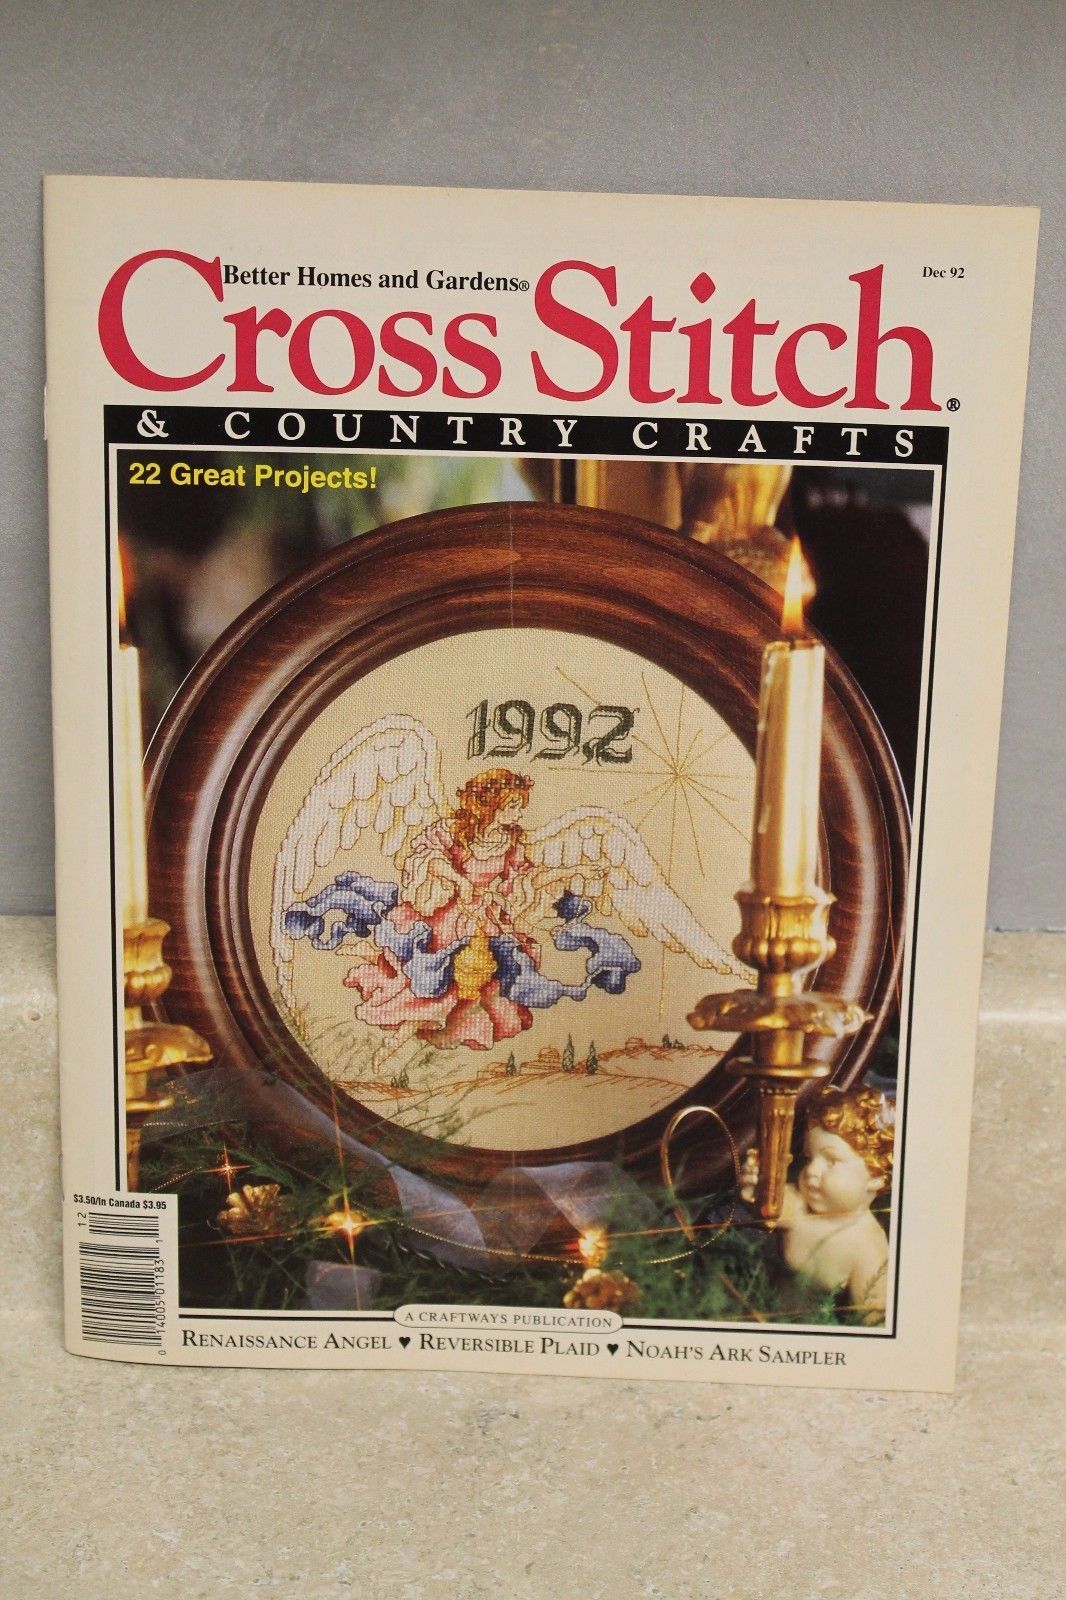 Cross Stitch Country Crafts Pattern: 5 listings